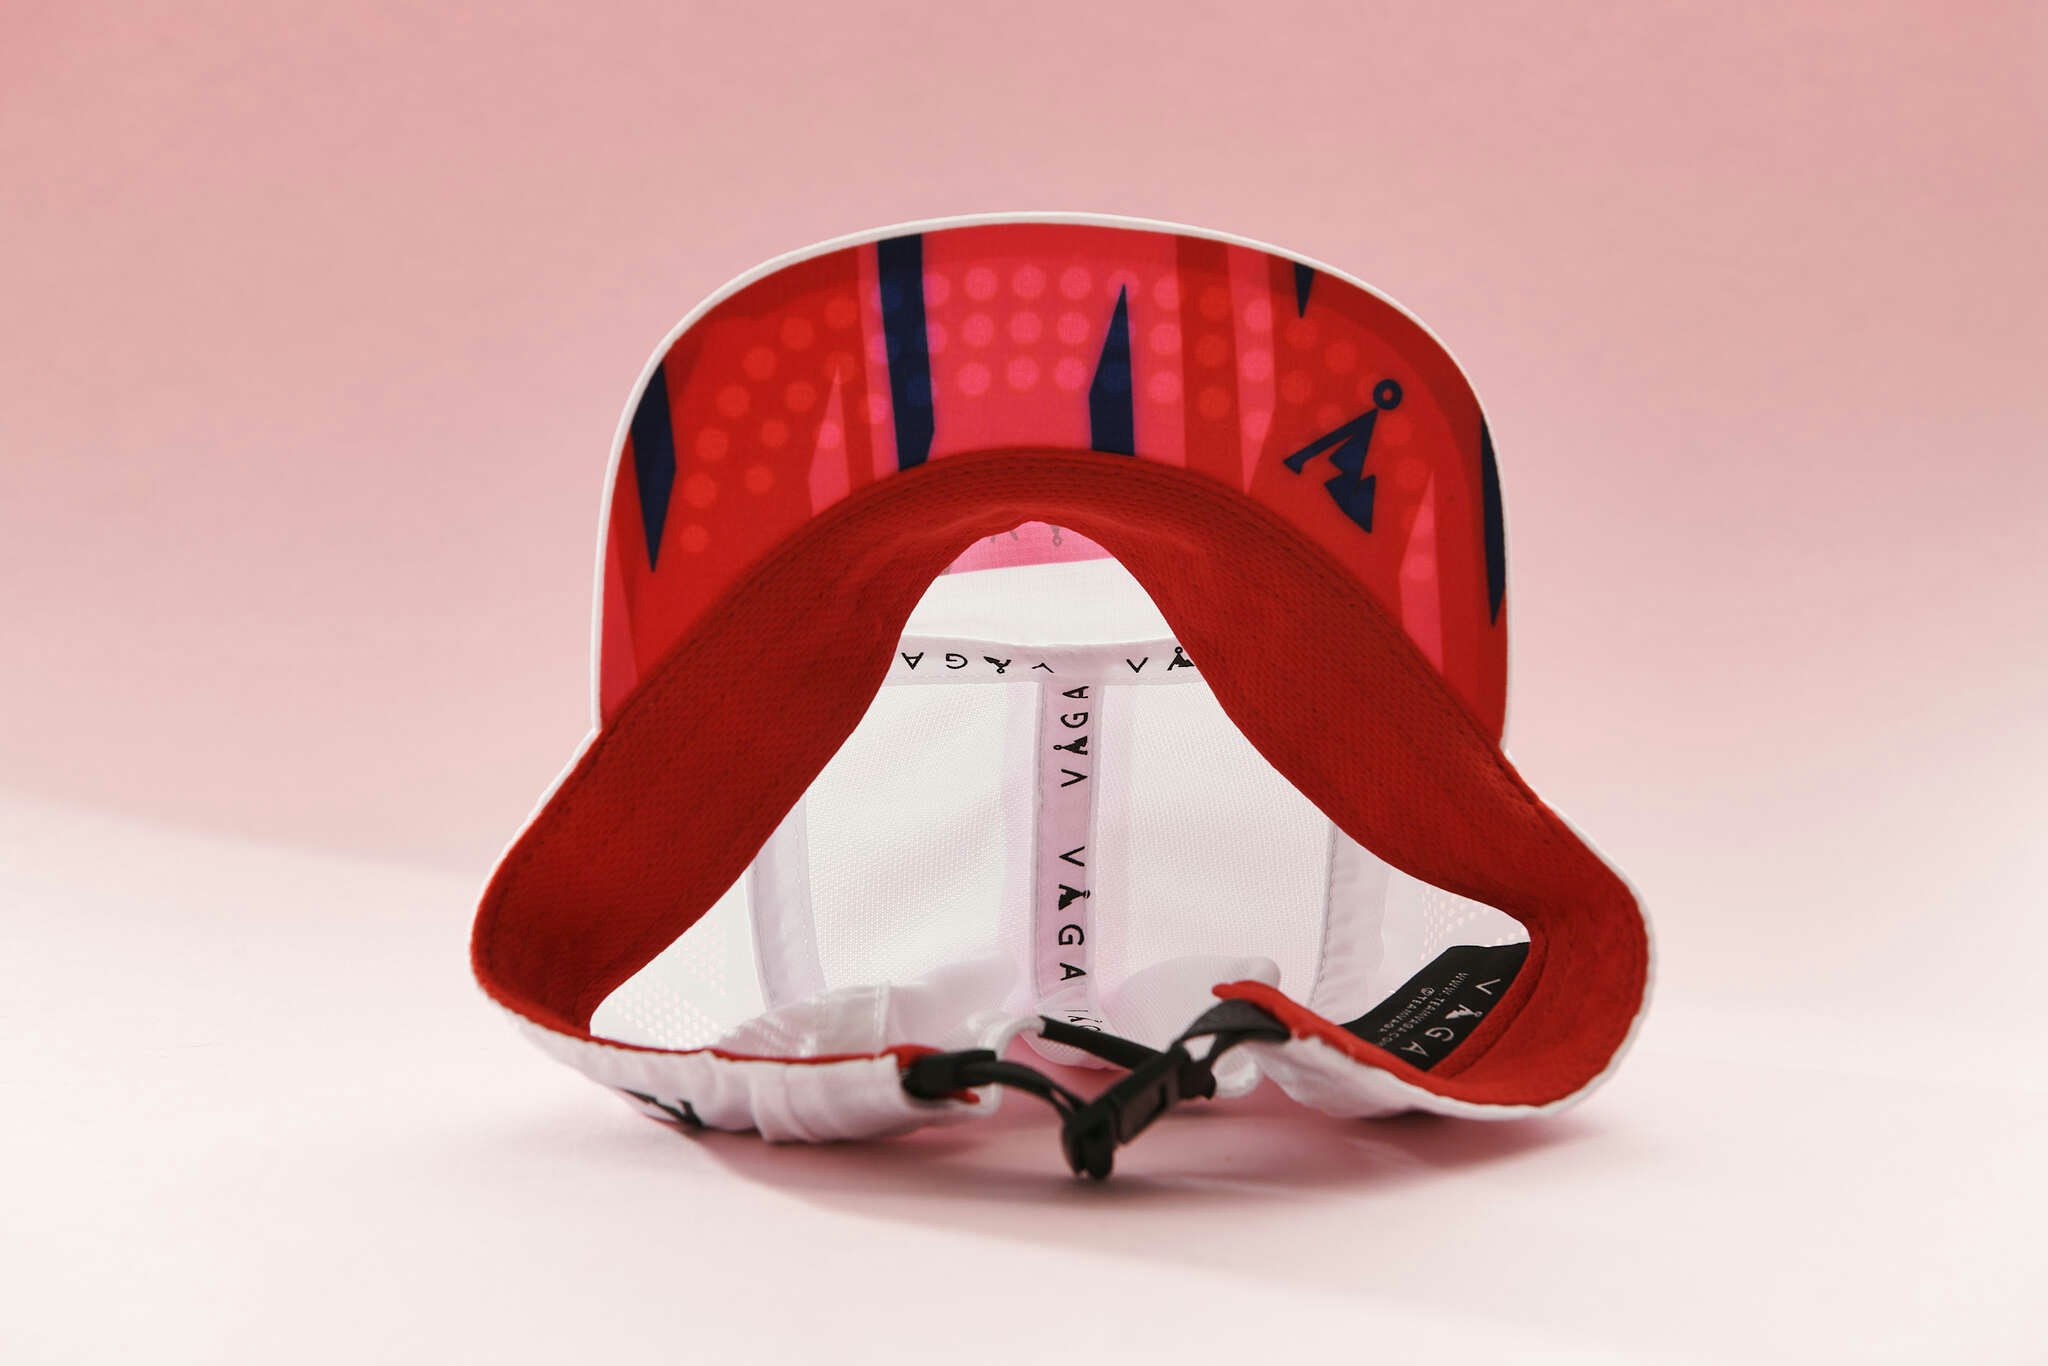 Våga Feather Cap - White/Neon Pink/Flame Red/Navy